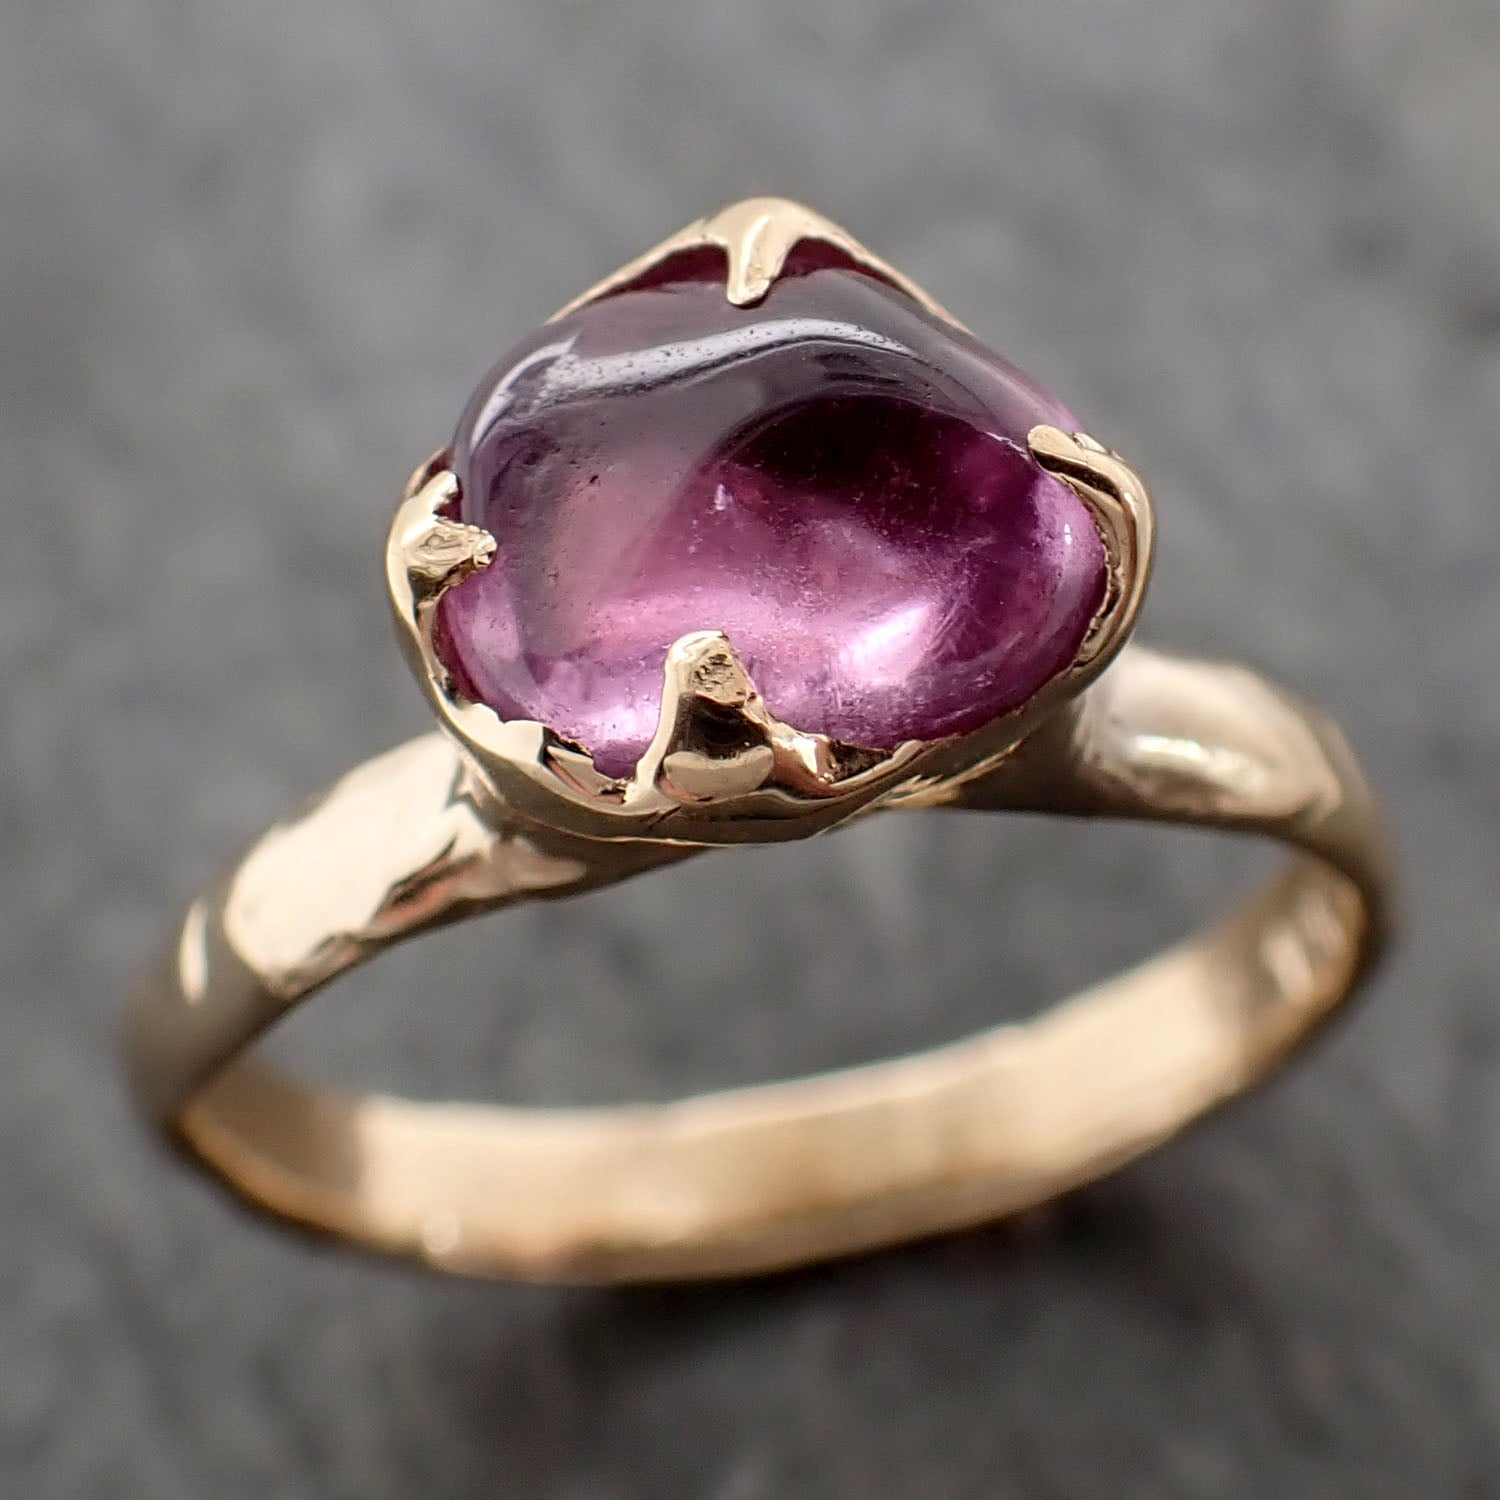 Sapphire Pebble candy 18k yellow gold Solitaire pink polished gemstone ring 2815